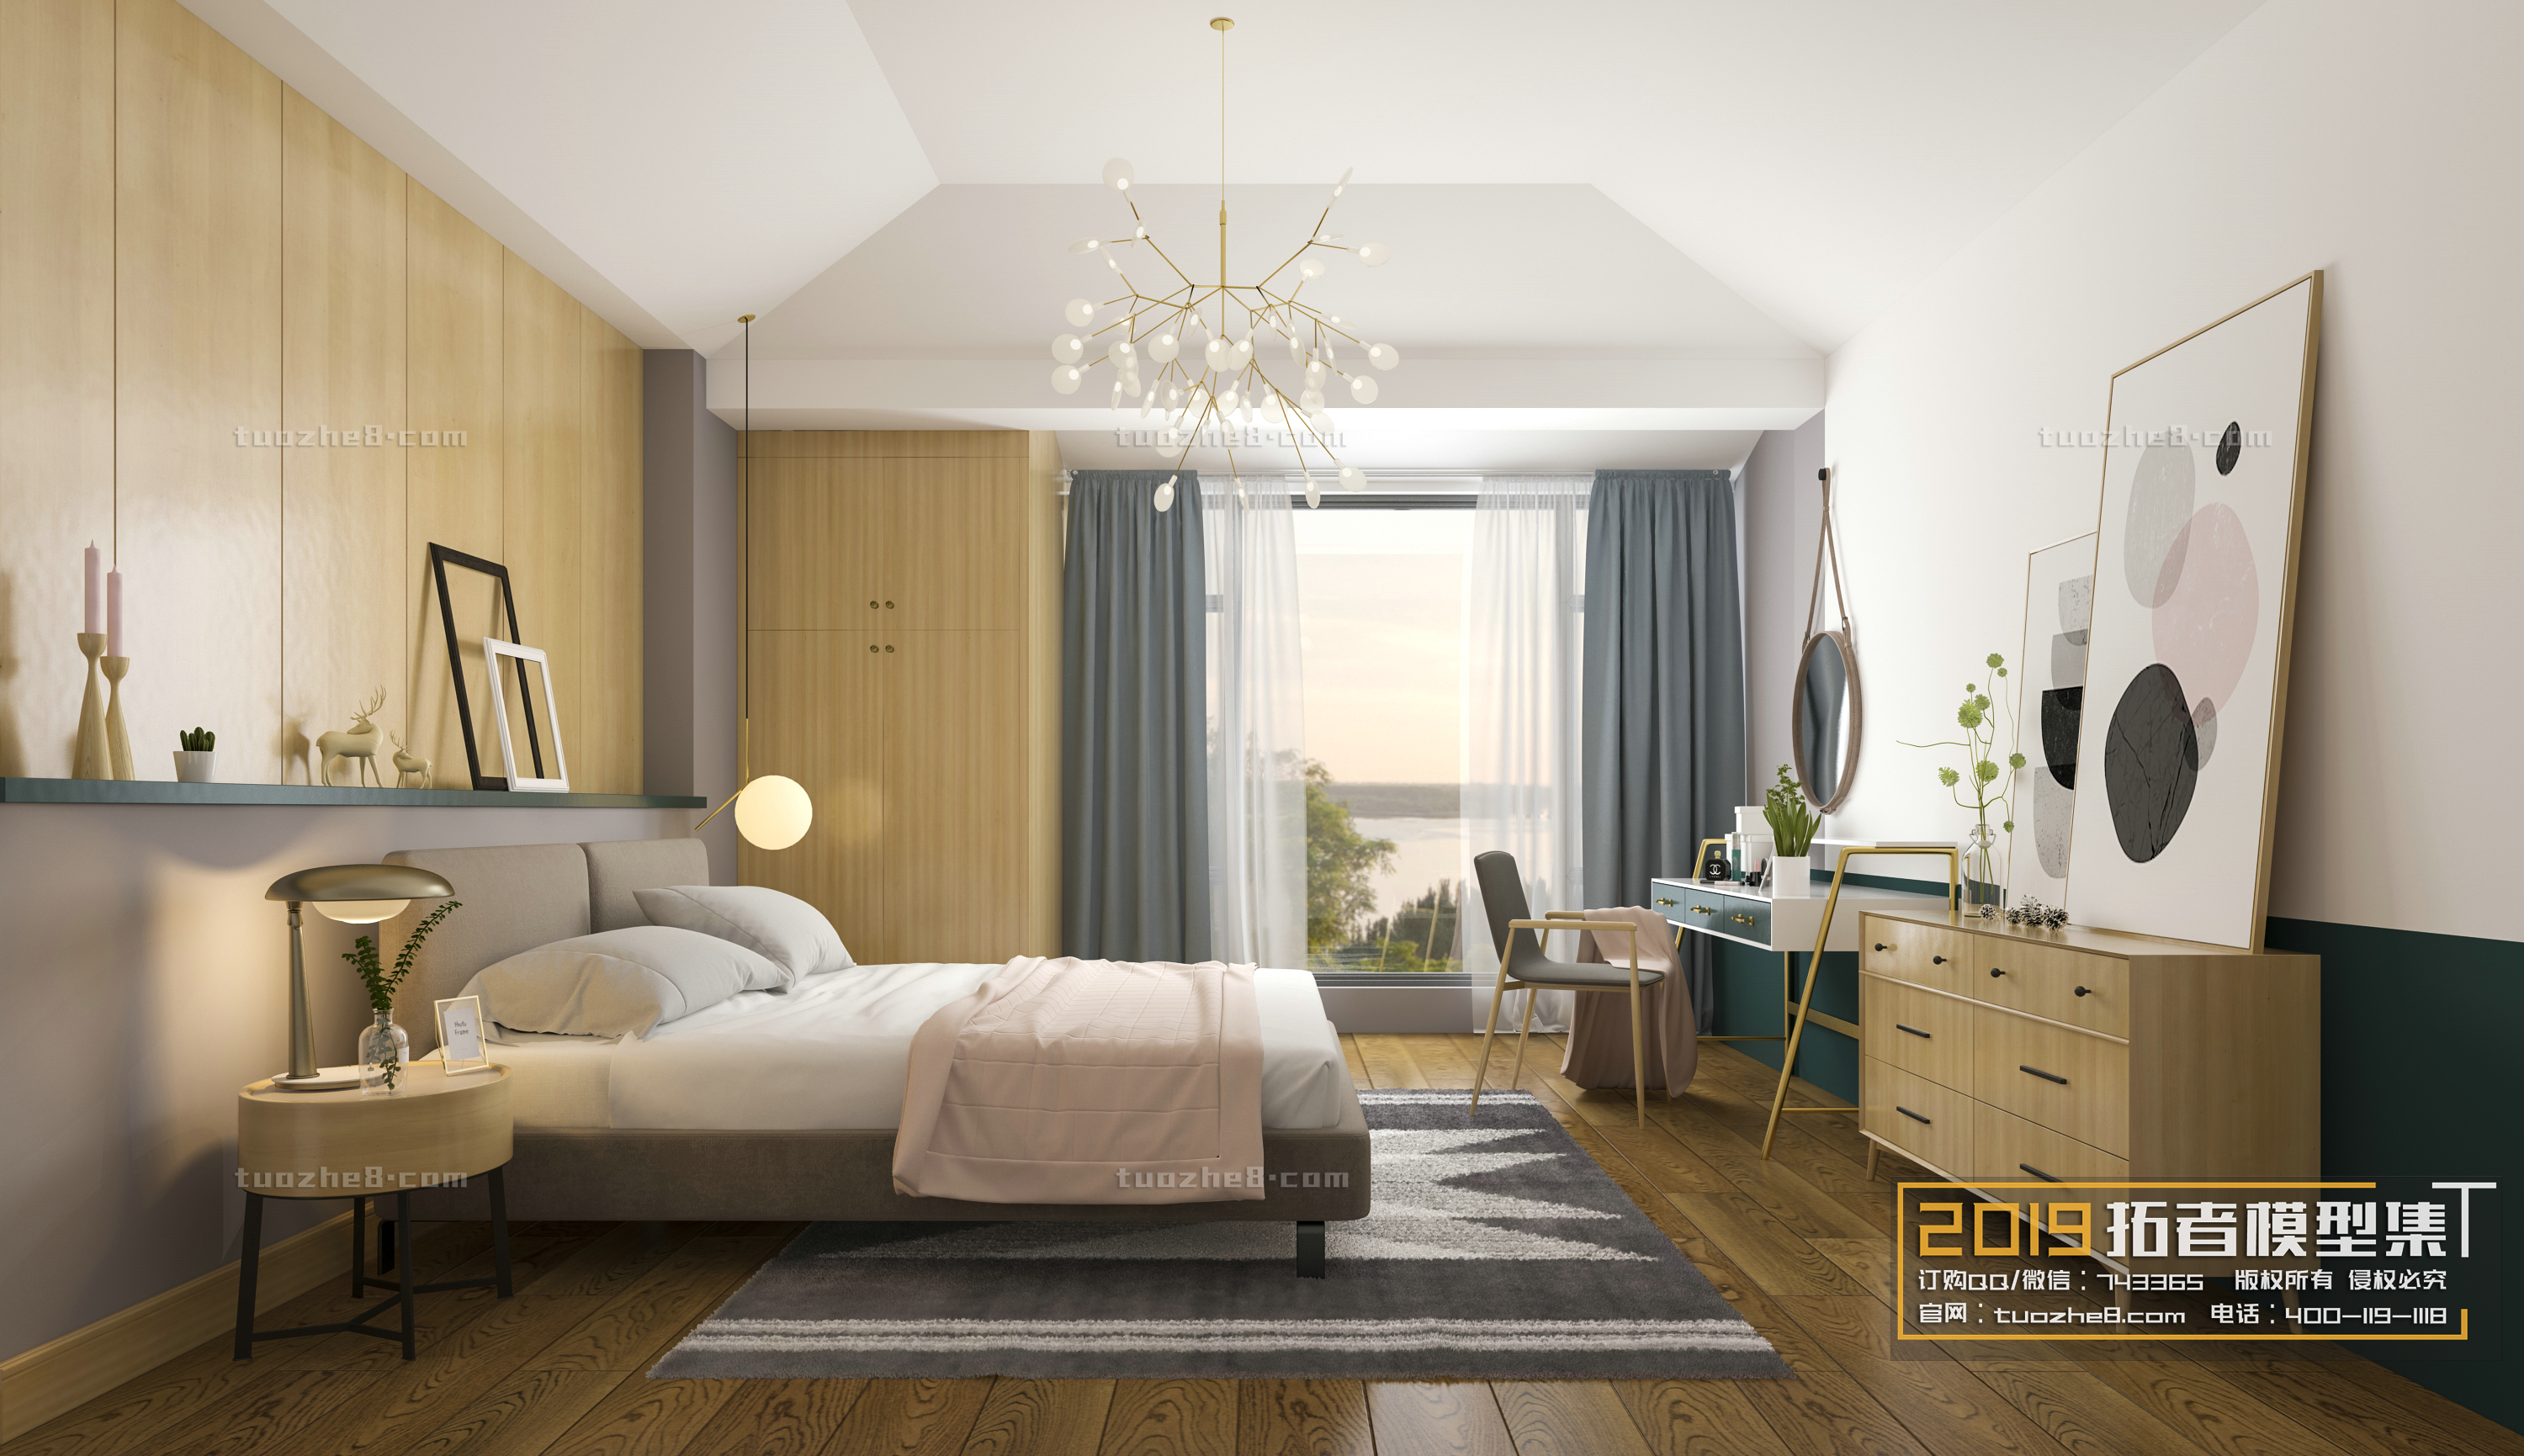 Extension Interior – BEDROOM – NORDIC STYLES – 006 - thumbnail 1